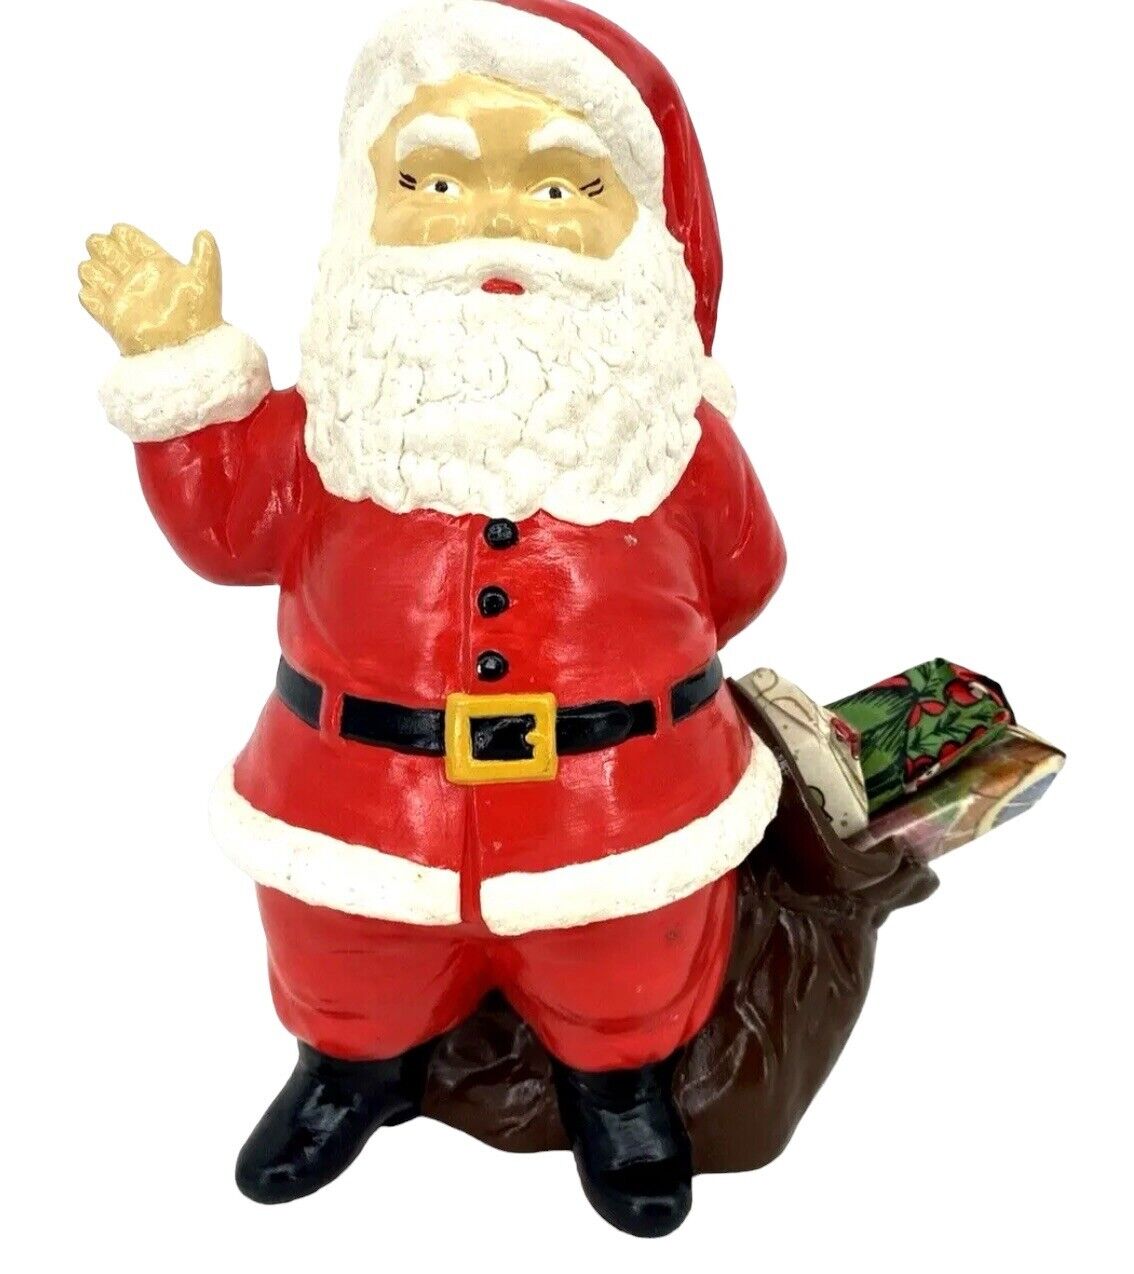 1973 Hand Painted 10.5” Duncan Ceramics Santa Claus With Candy Sack Waving